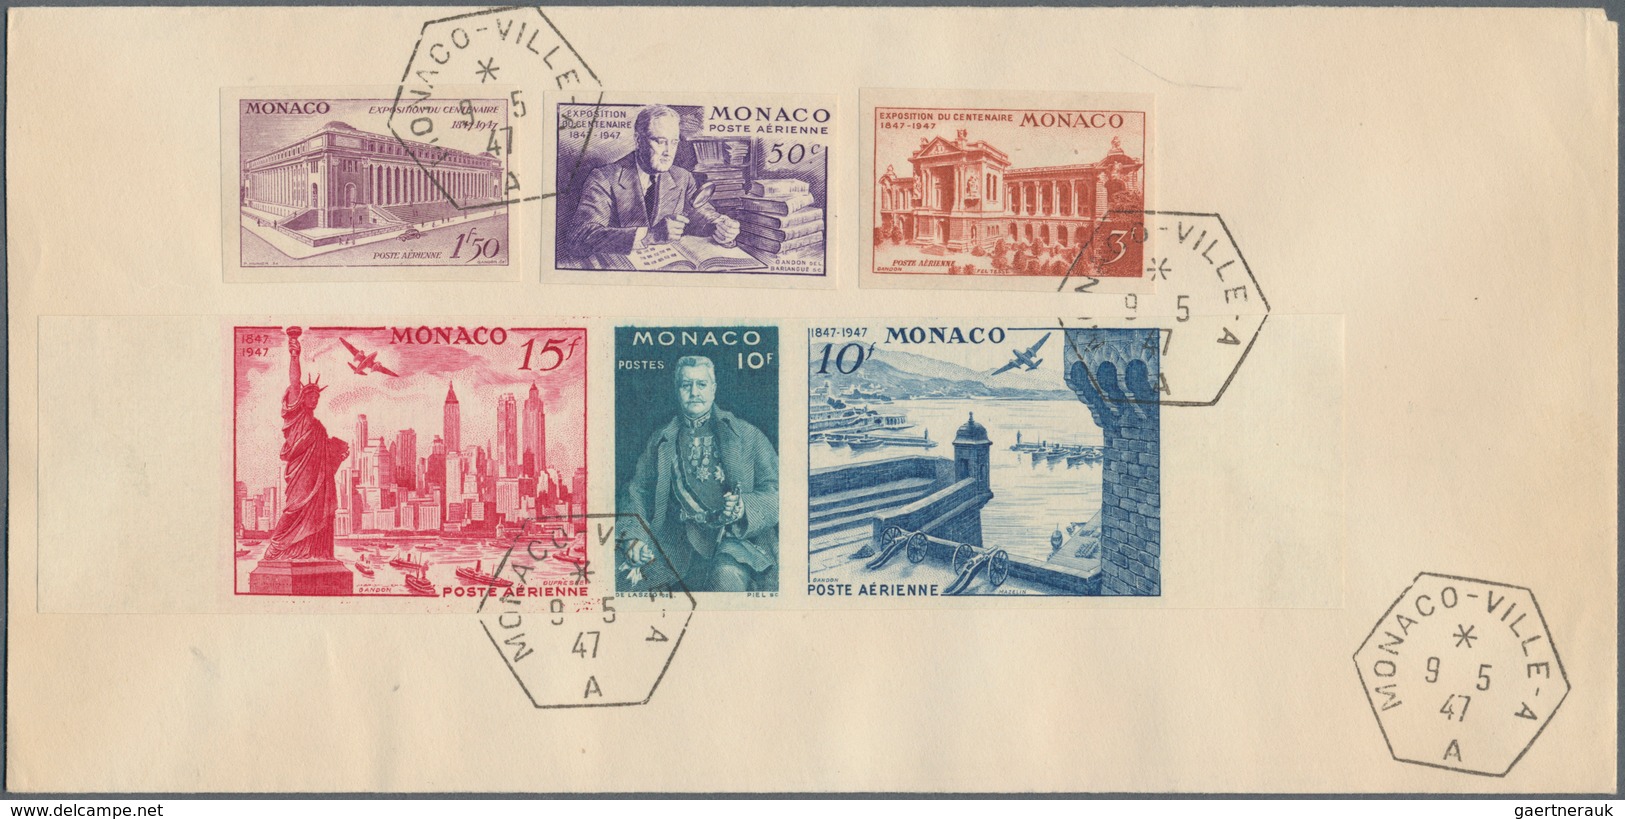 Monaco: 1946/1947, Death Anniversary of President Roosevelt/New York Stamp Exhibition, two complete